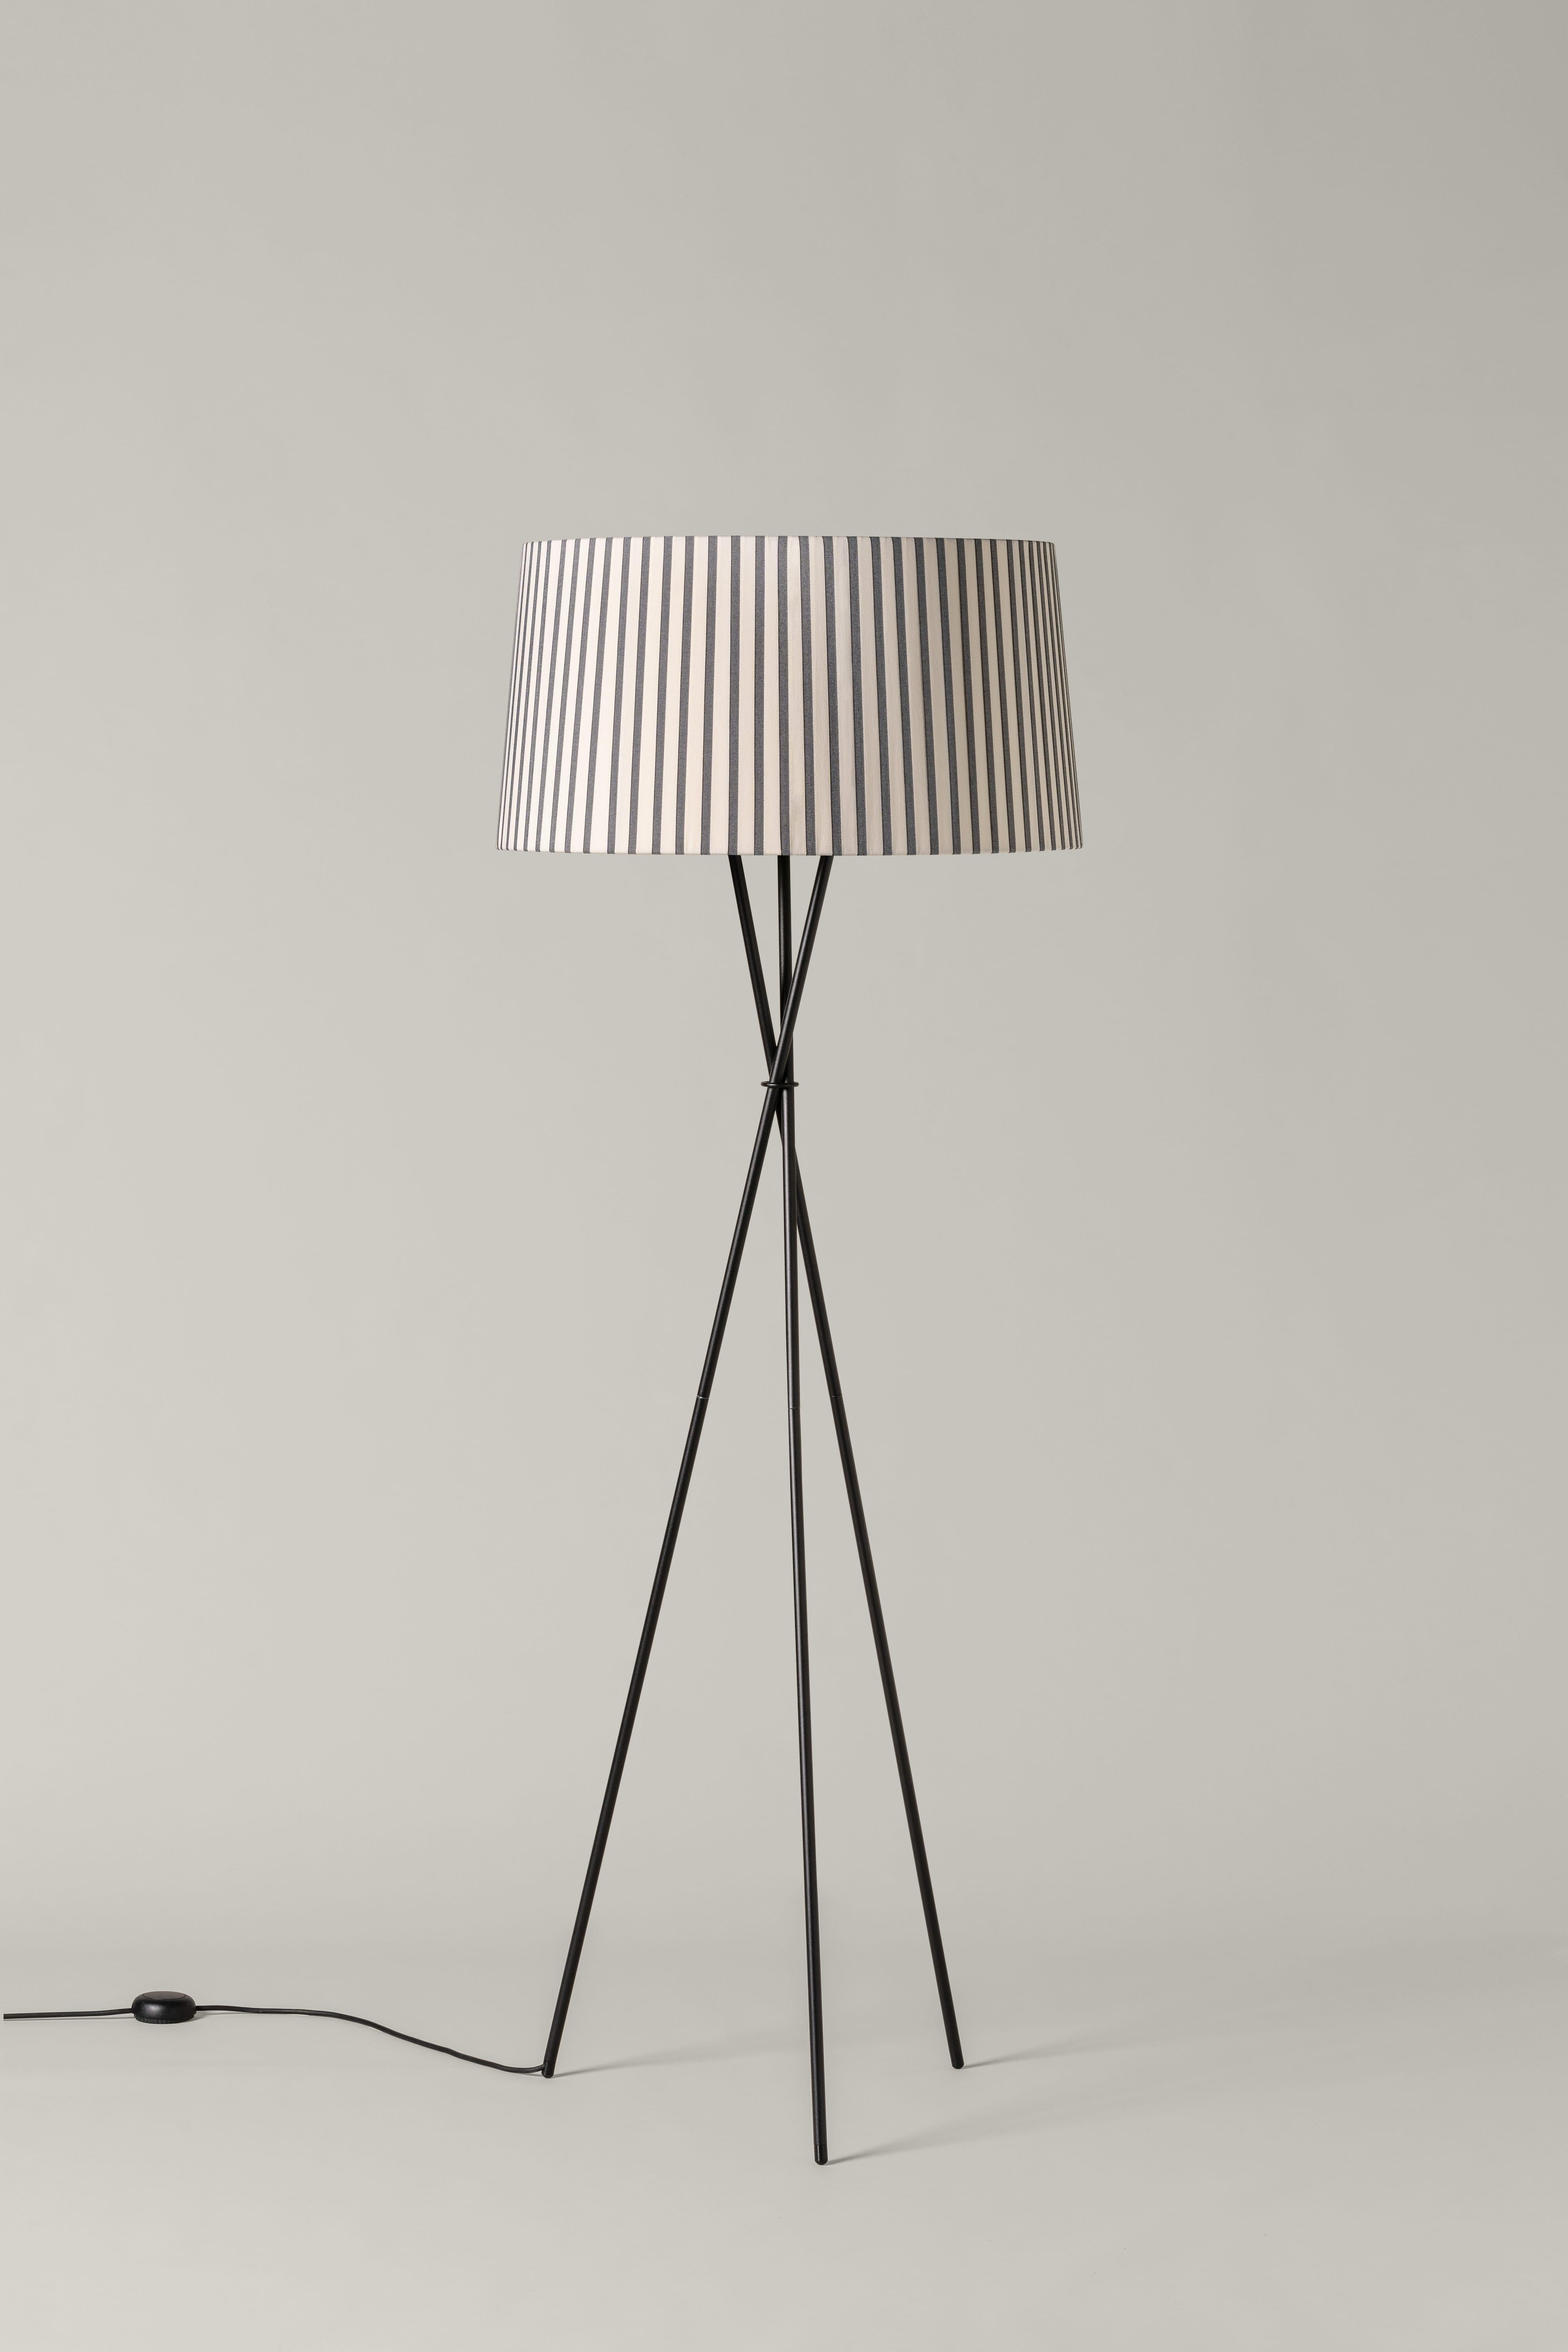 Bretona Trípode G5 floor lamp by Santa & Cole
Dimensions: D 62 x H 168 cm
Materials: Metal, bretona stripe ribbon lampshade.
Available in other colors.

Trípode humanises neutral spaces with its colourful and functional sobriety. The shade is